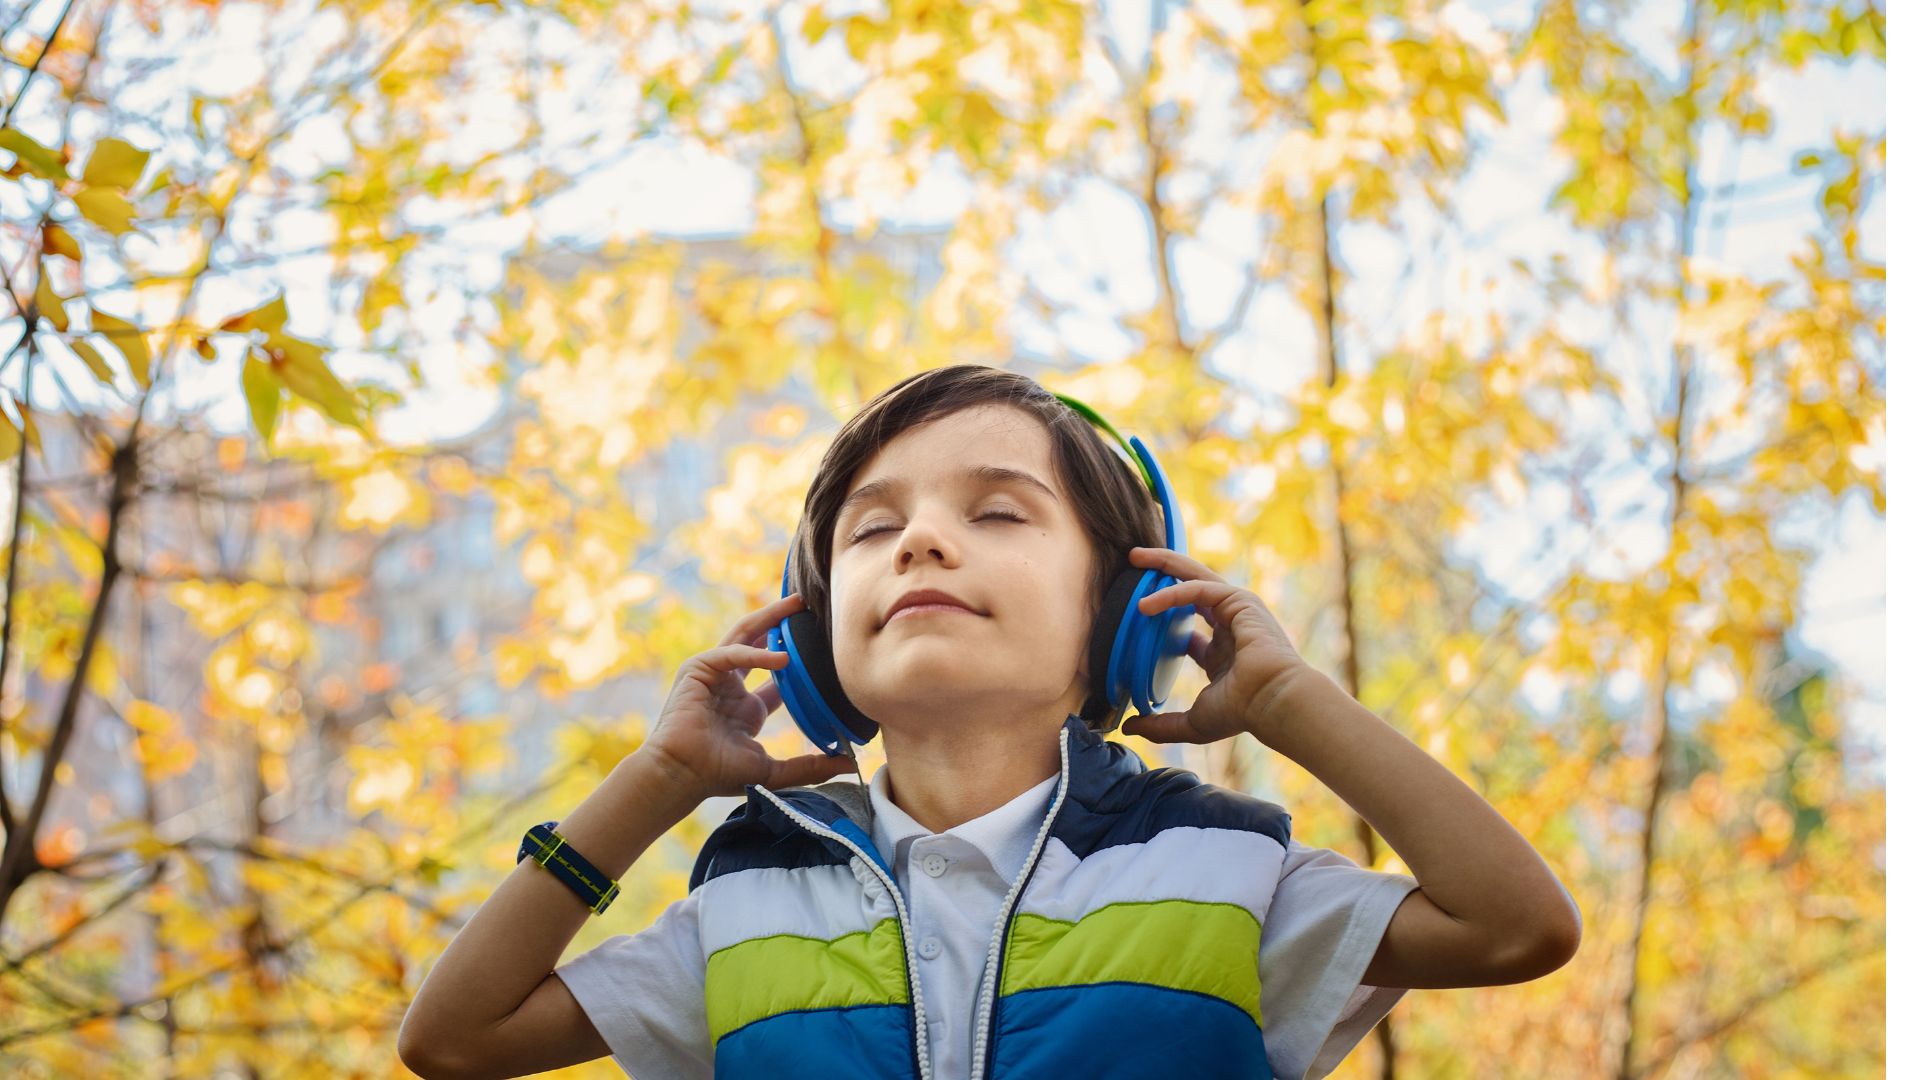 Child in nature listening to music on headphones